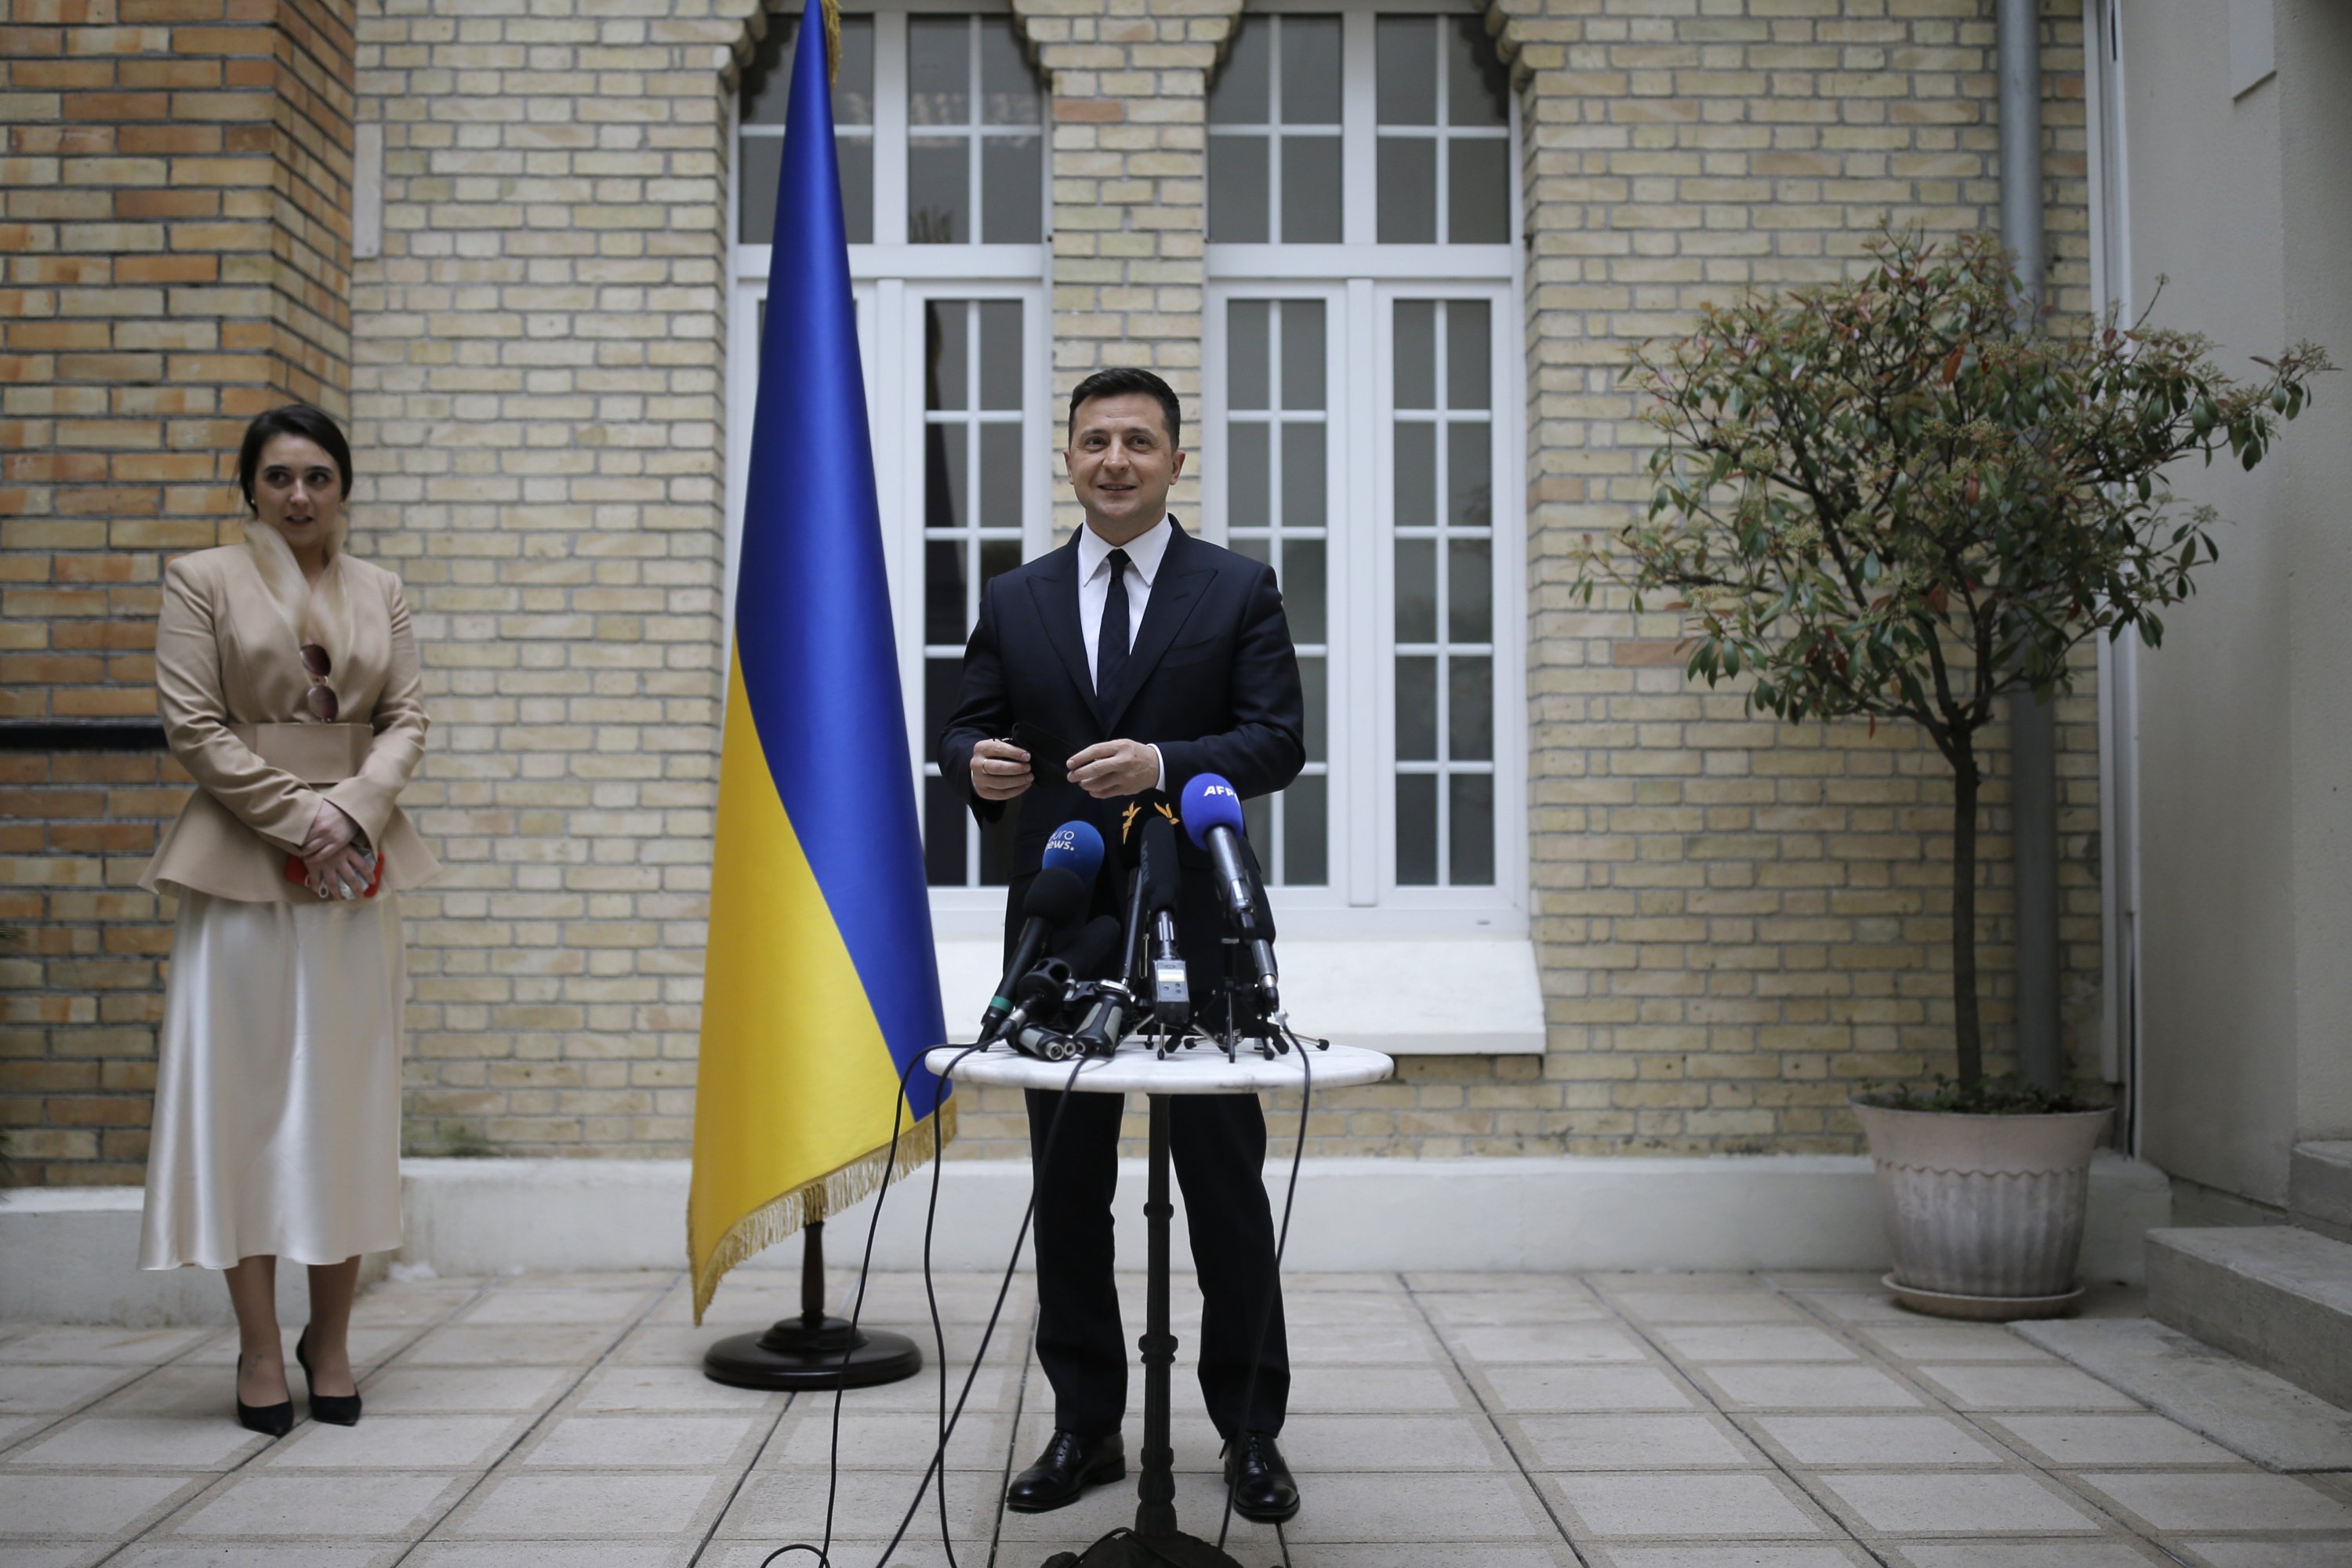 Putin Zelenskiy Likely To Meet To Discuss Ukraine Russia Tensions Daily Sabah